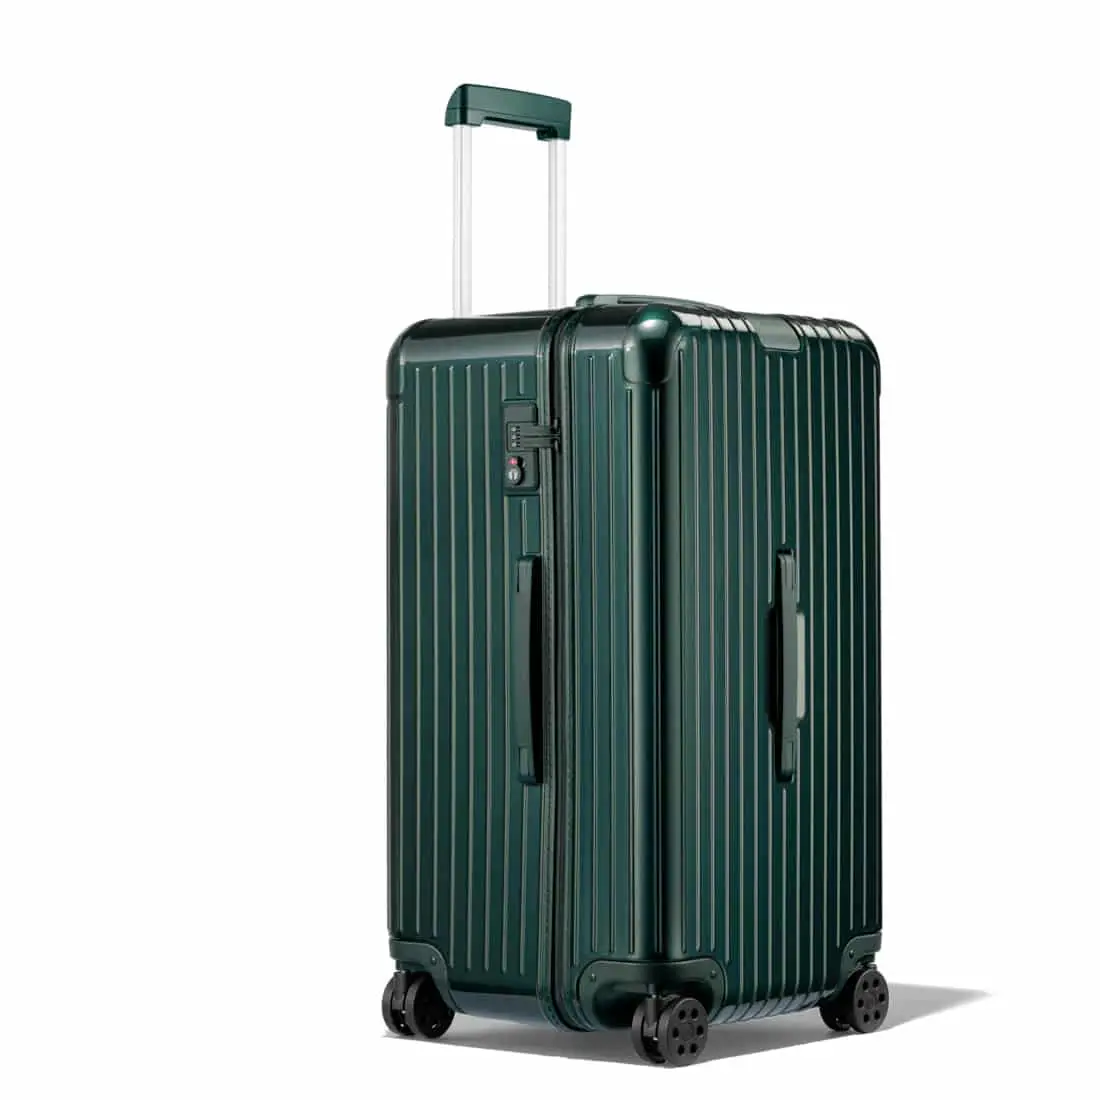 How Long Does Rimowa Luggage Last?